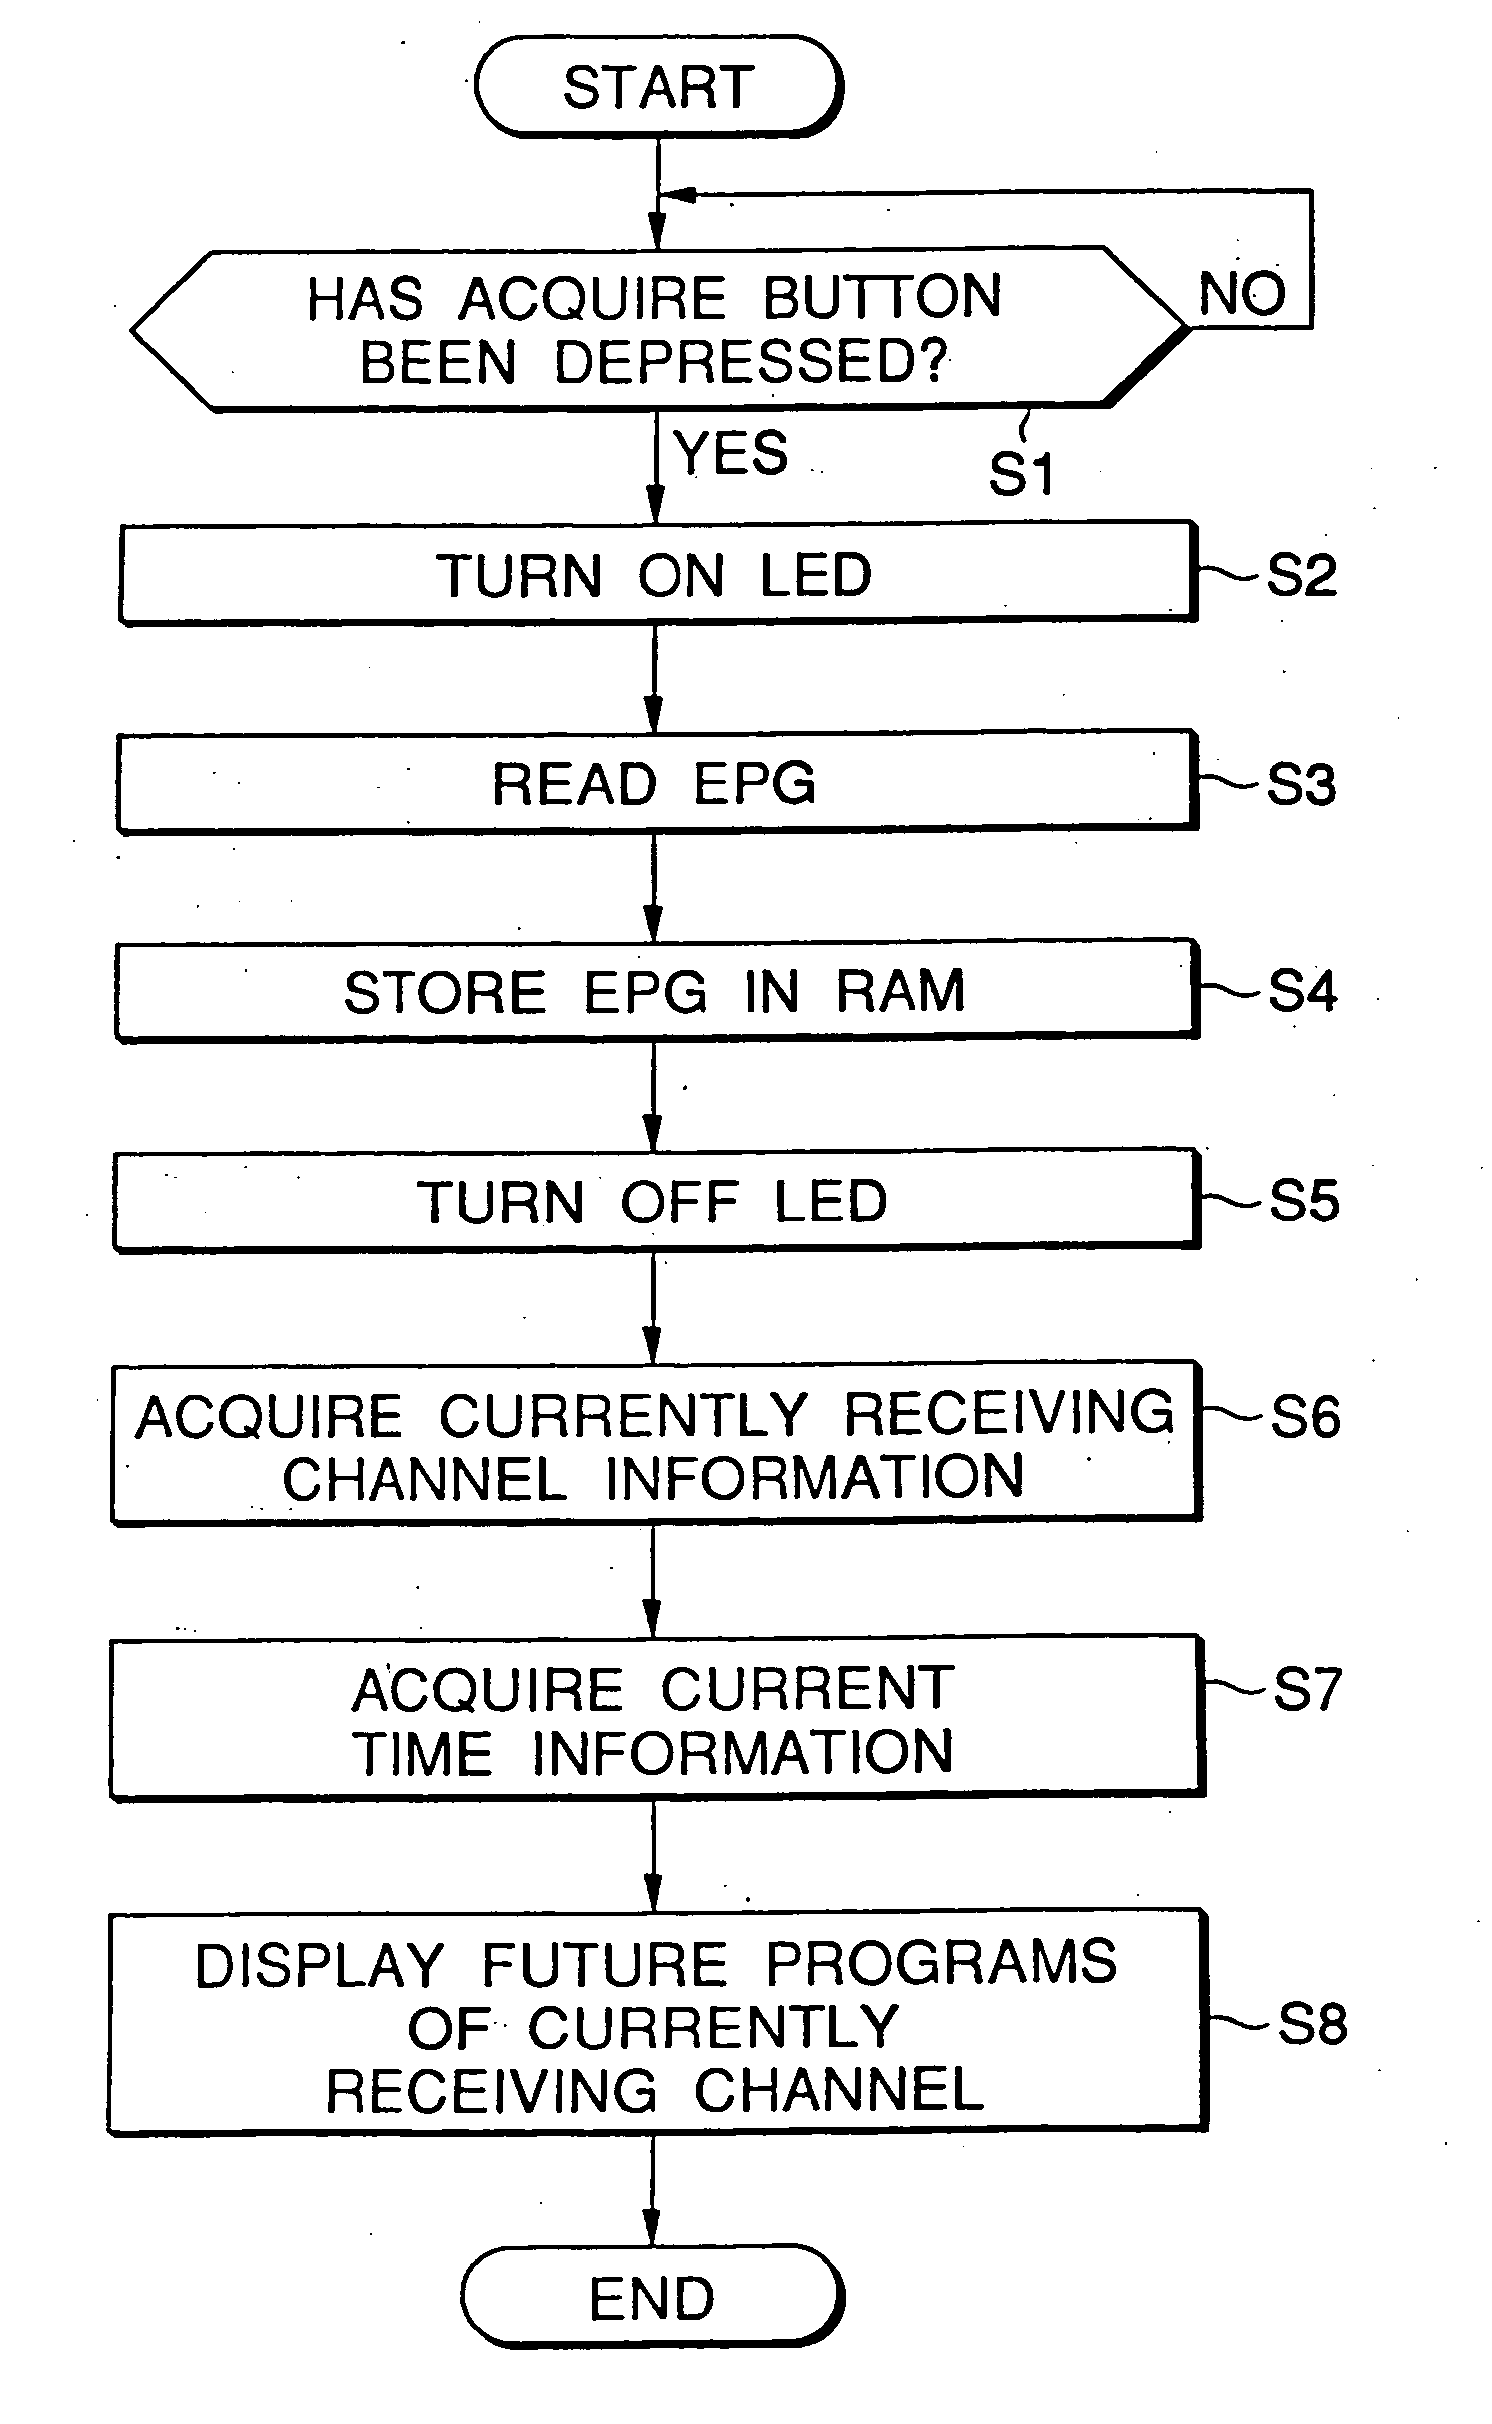 Control device, control method, electric apparatus, control method of an electric apparatus, electric apparatus system, control method of an apparatus system, and transmission medium